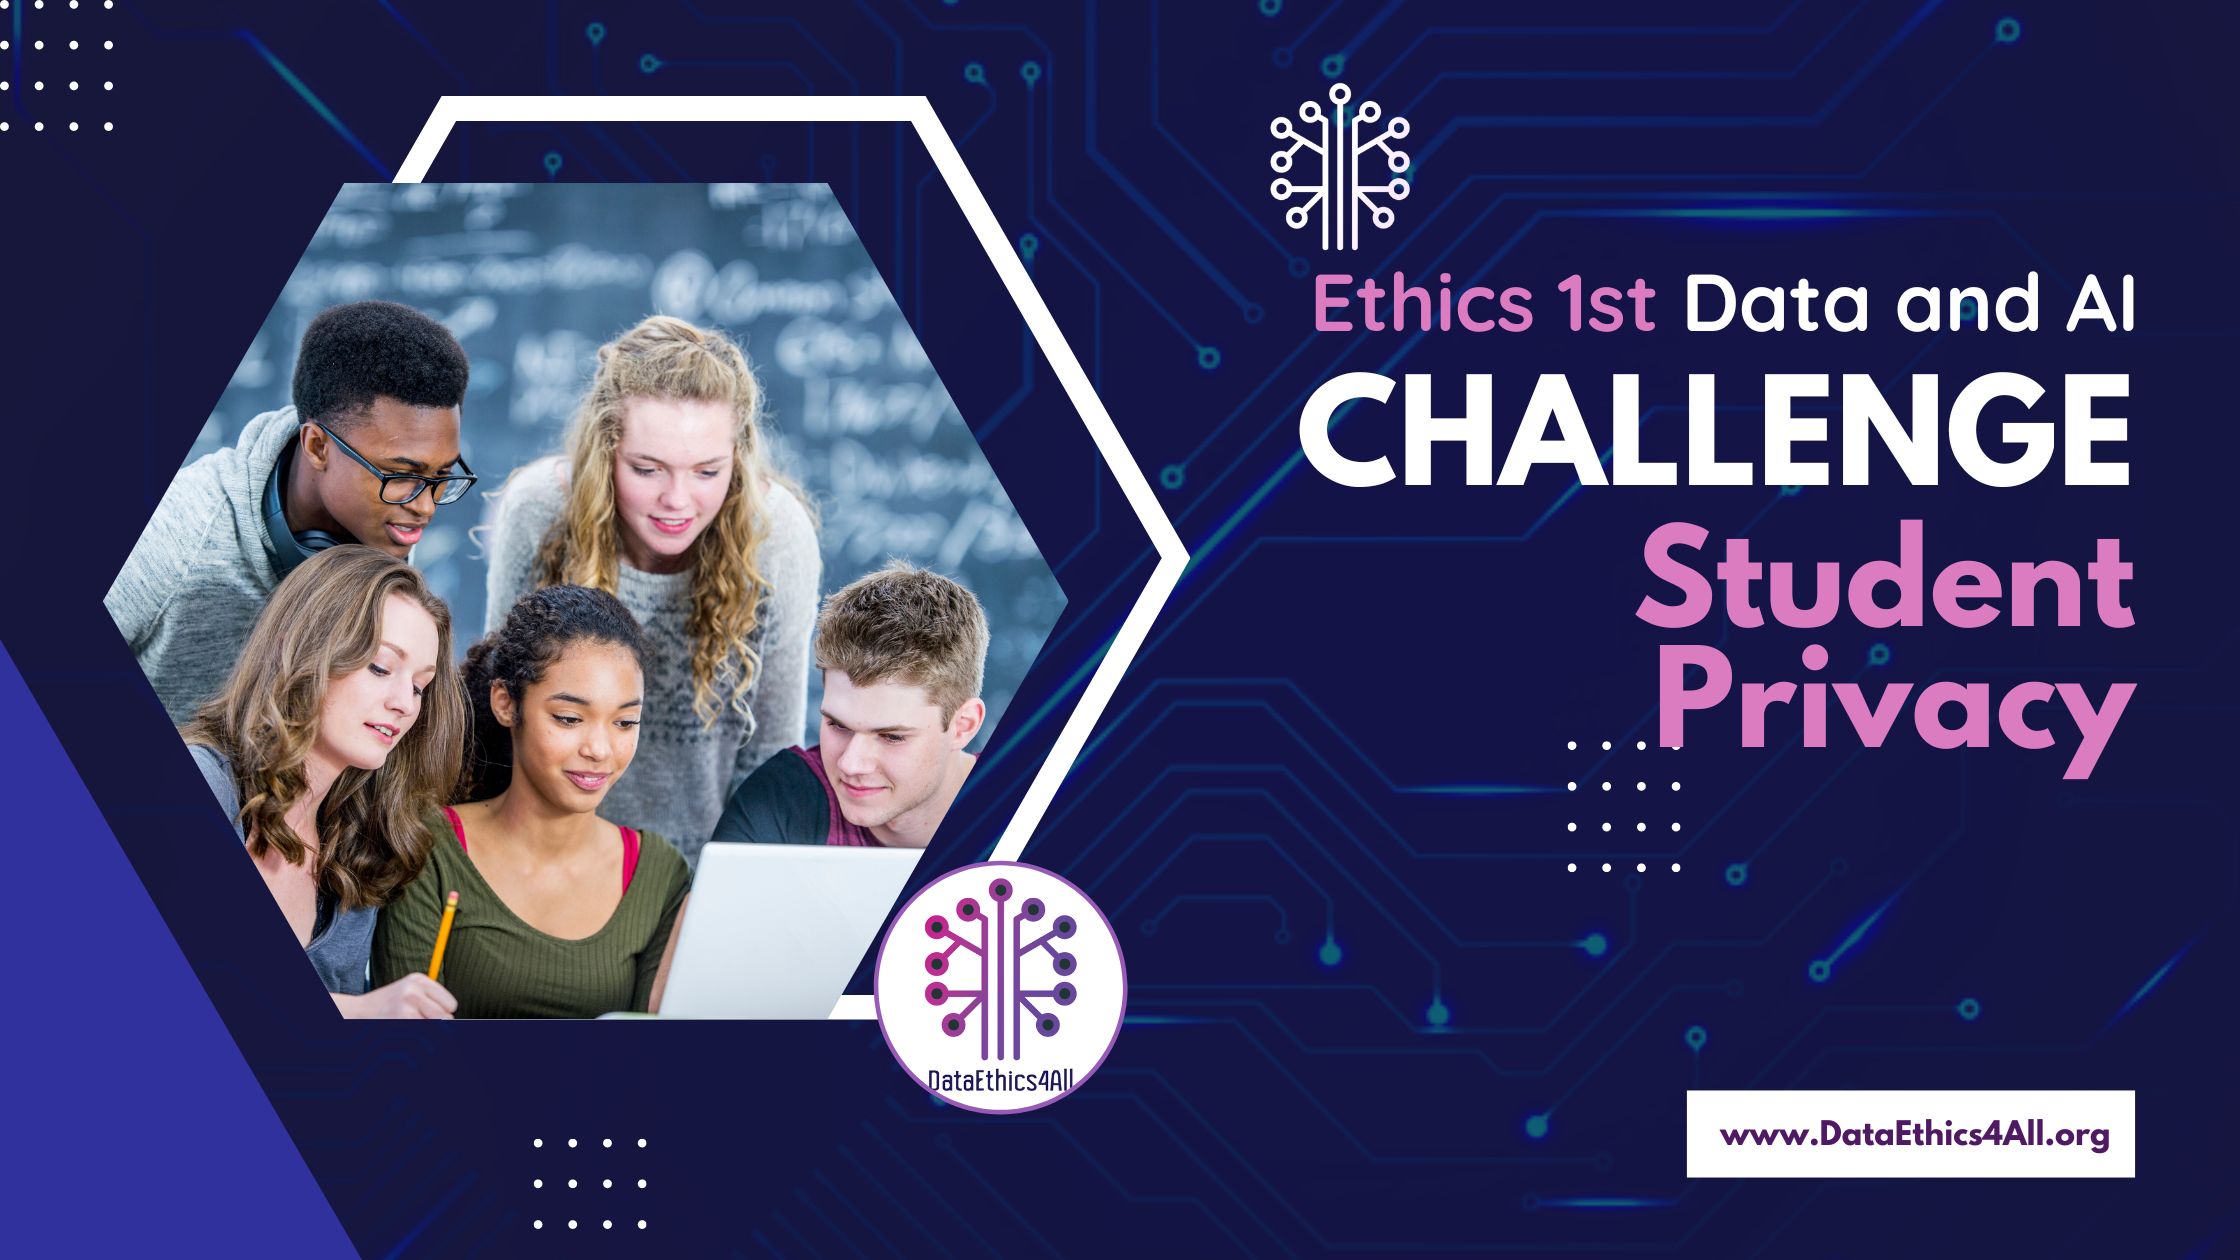 DataEthics4All Foundation Ethics 1st Data and AI Challenge Student Privacy